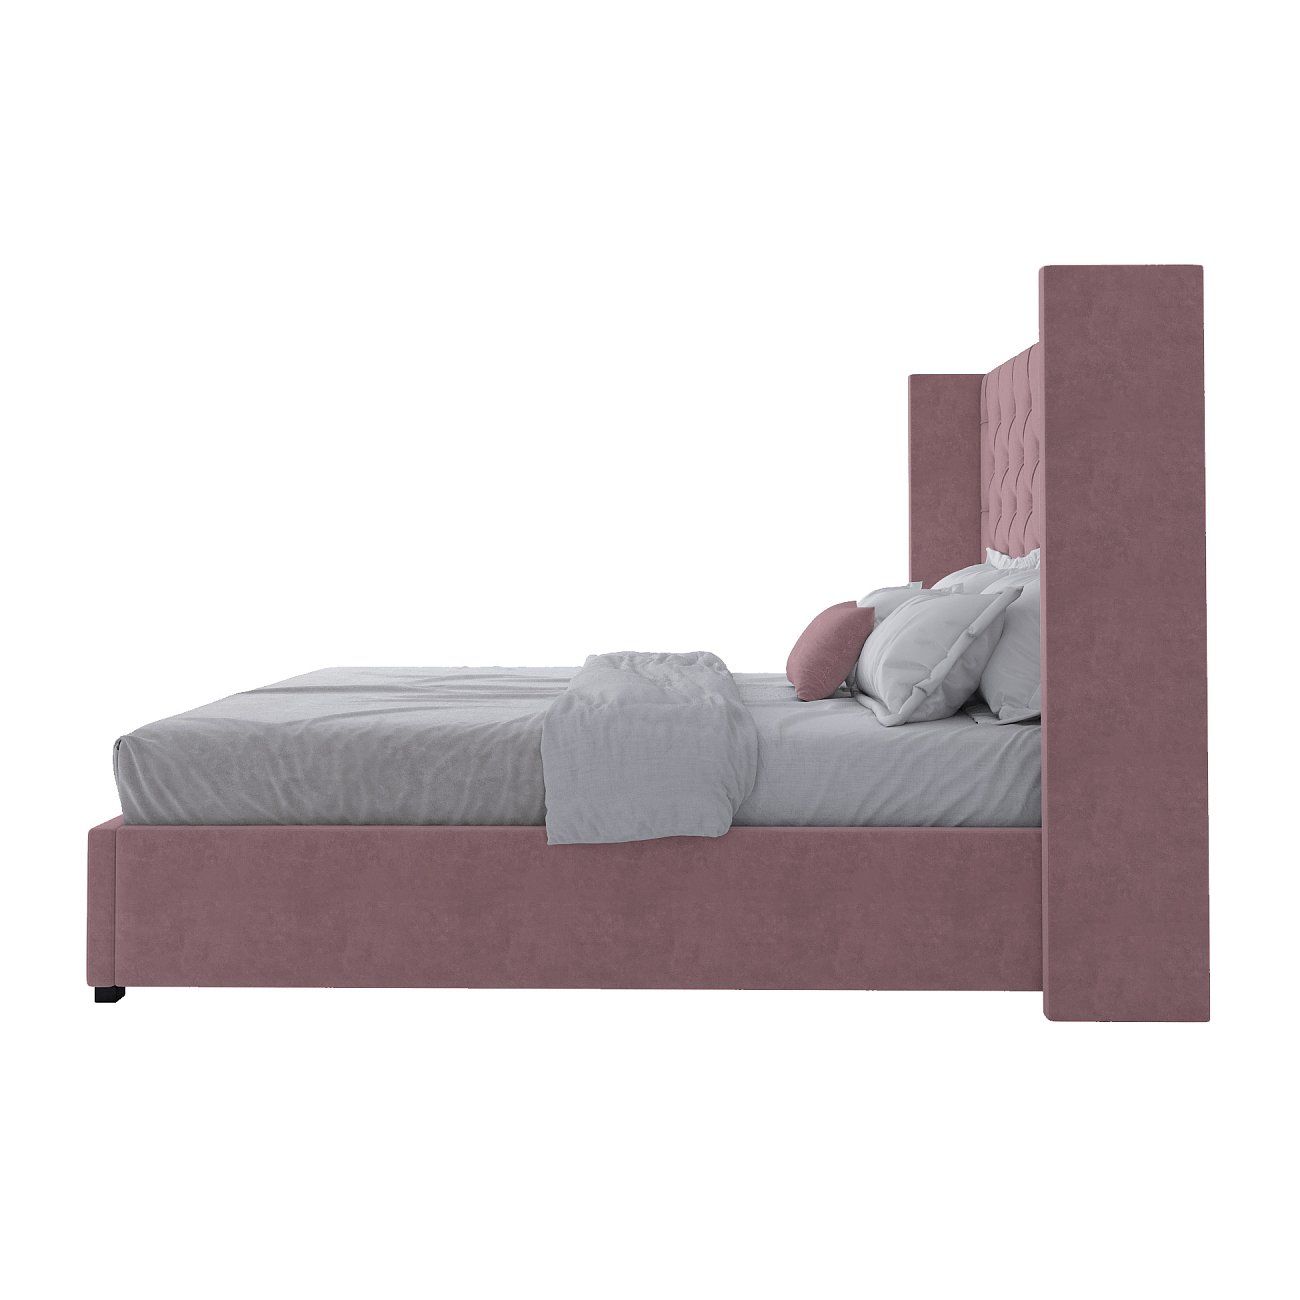 Double bed with upholstered headboard 160x200 cm Dusty Rose Wing-2